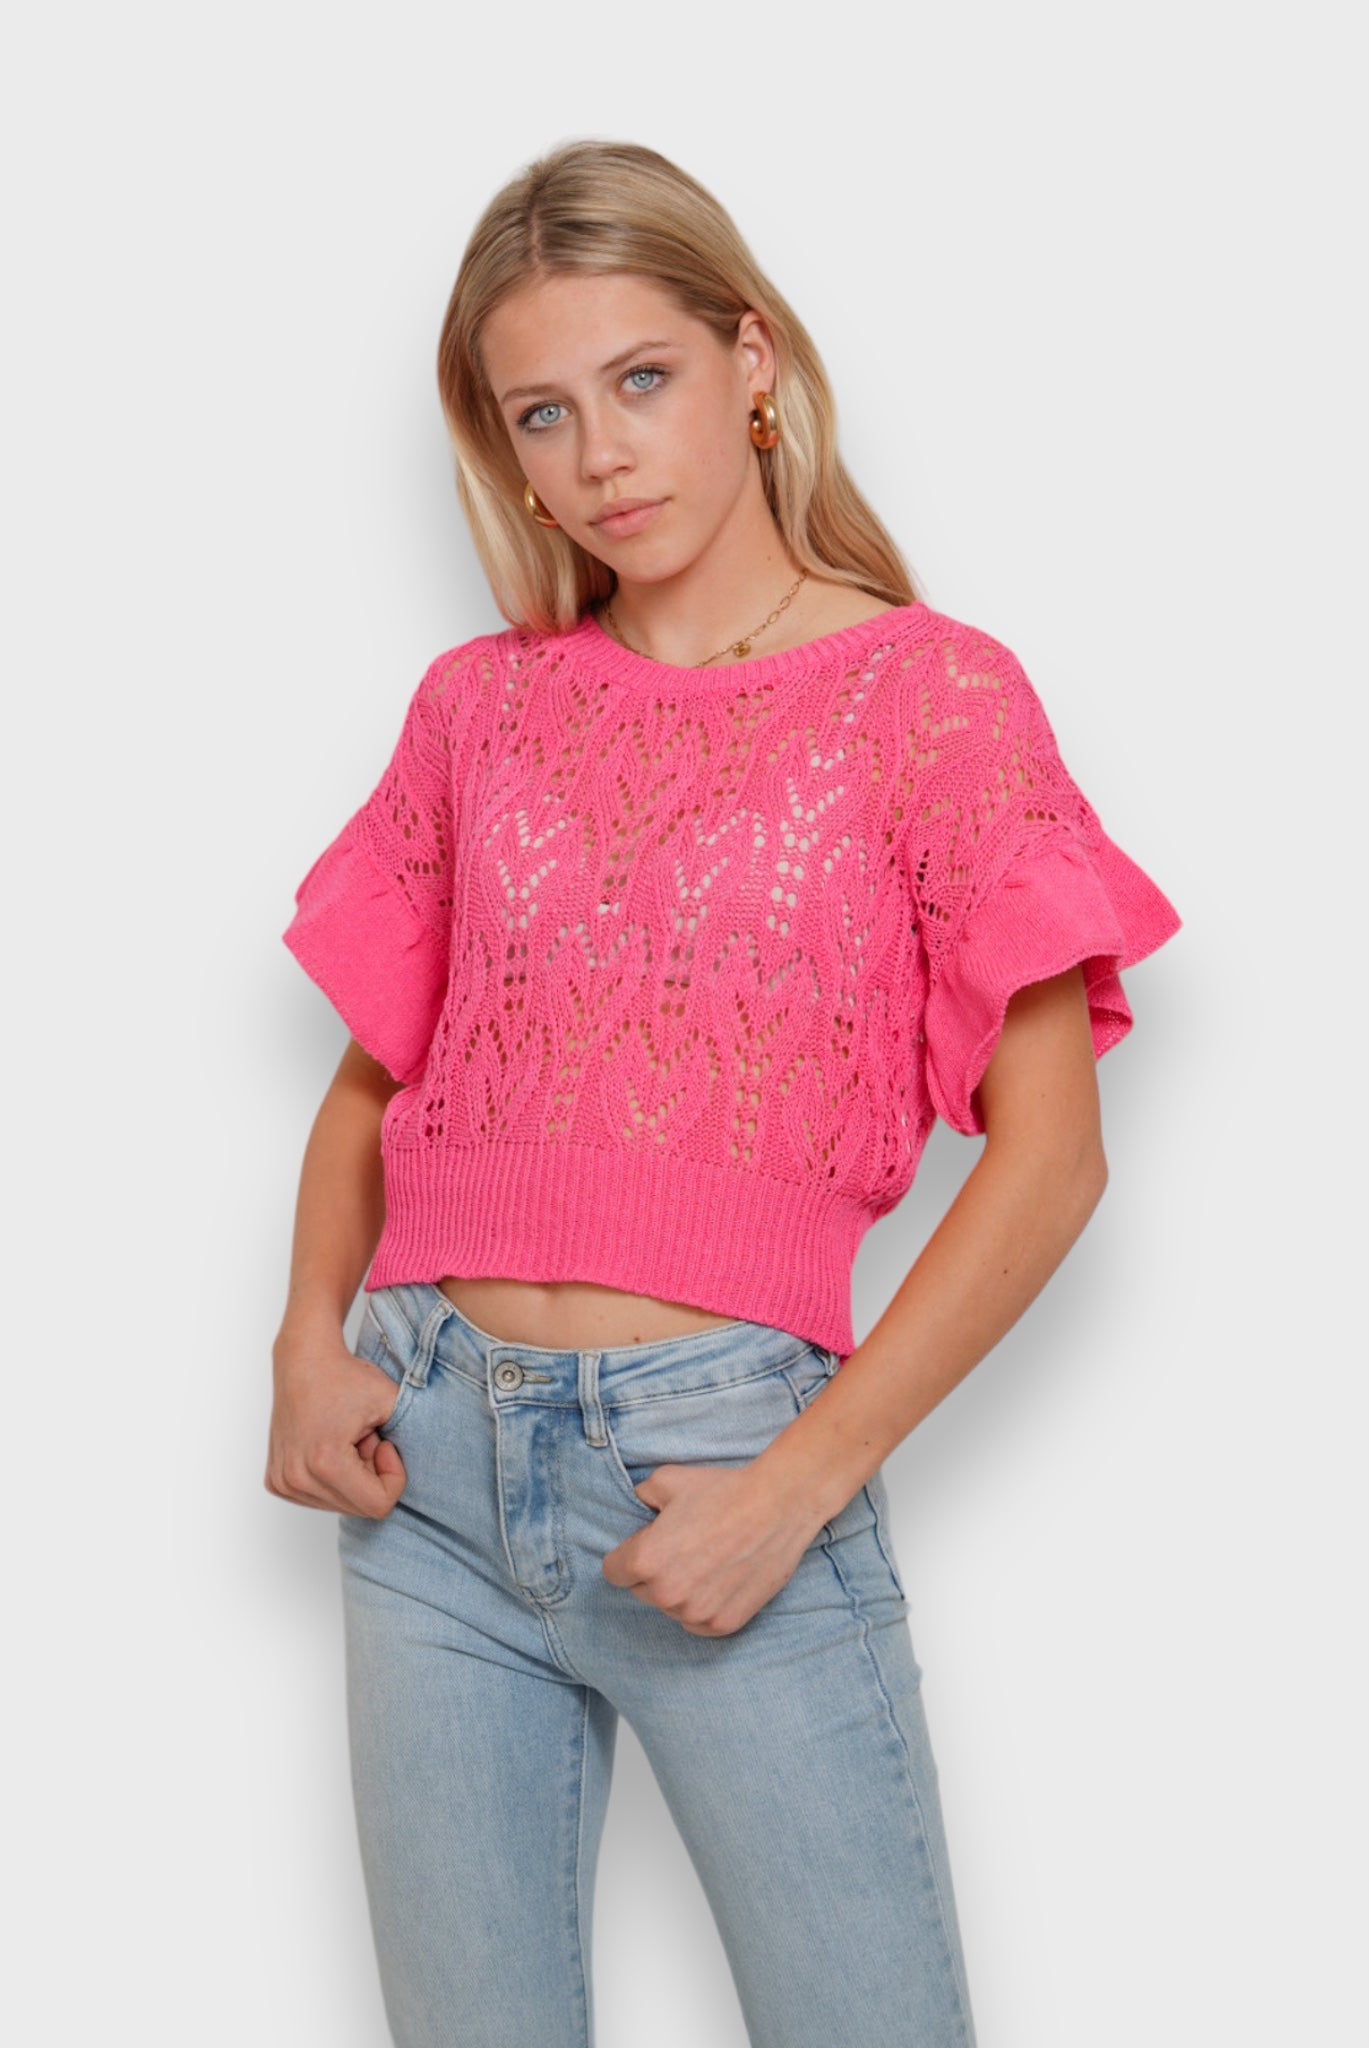 "Cannes" top pink